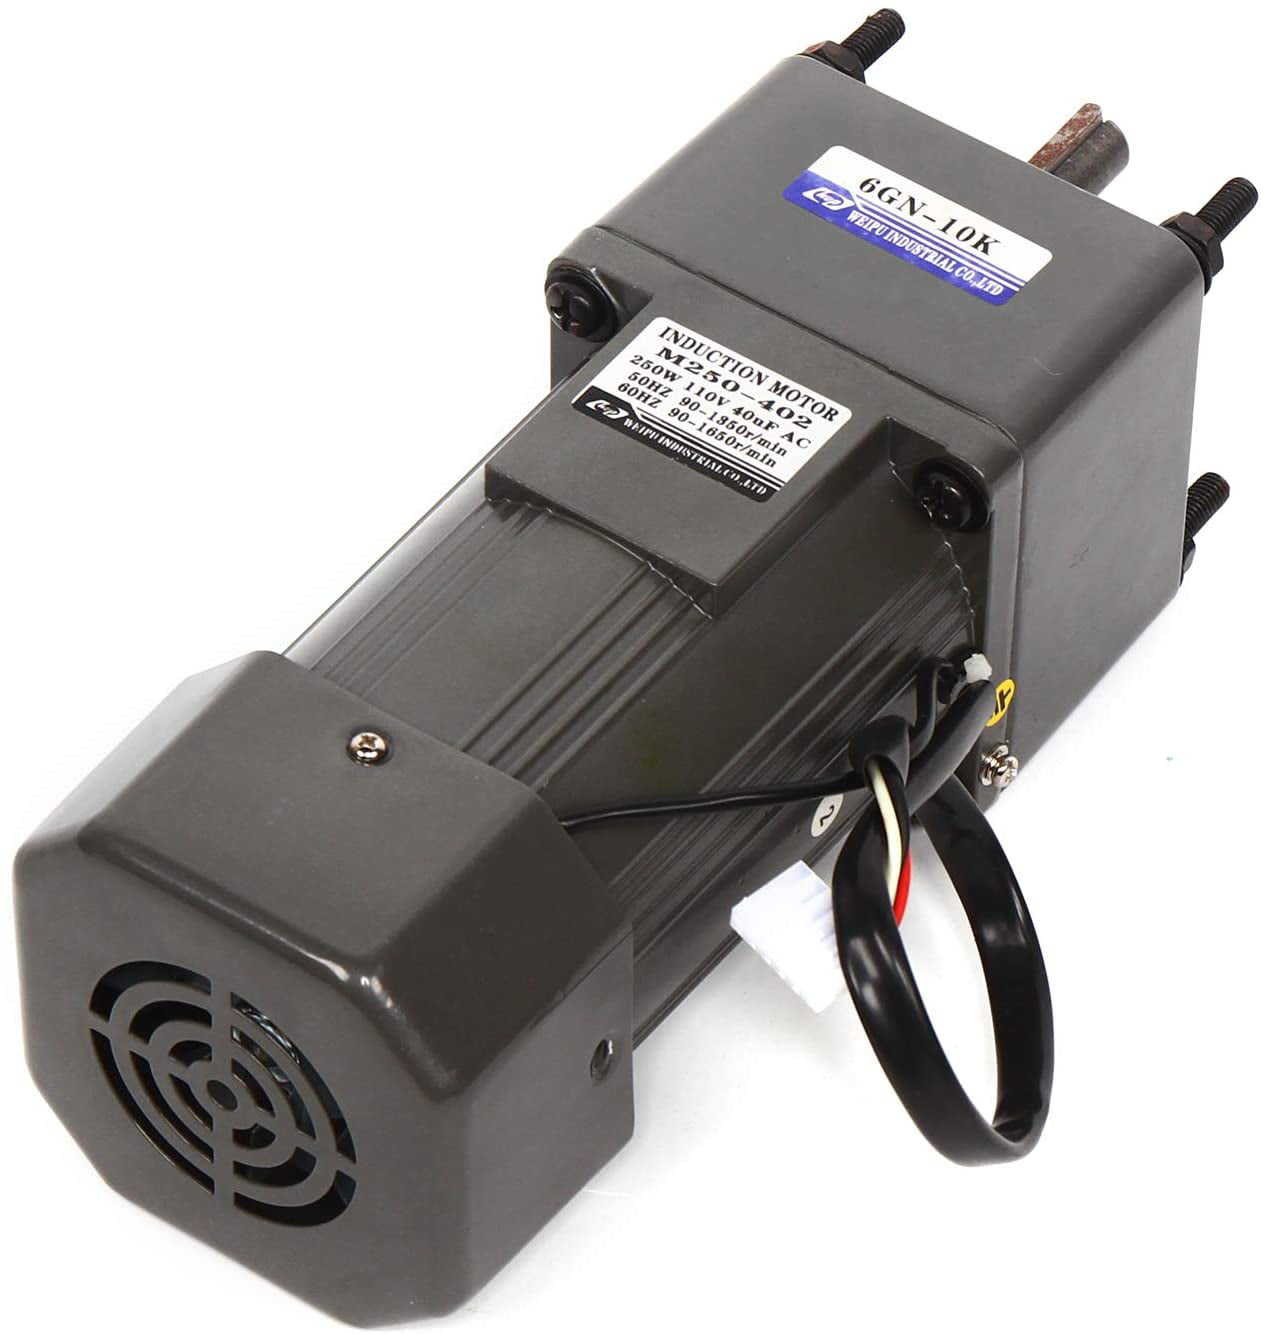 250W 10K AC gear motor electric motor variable speed controller1:10AutomationNew